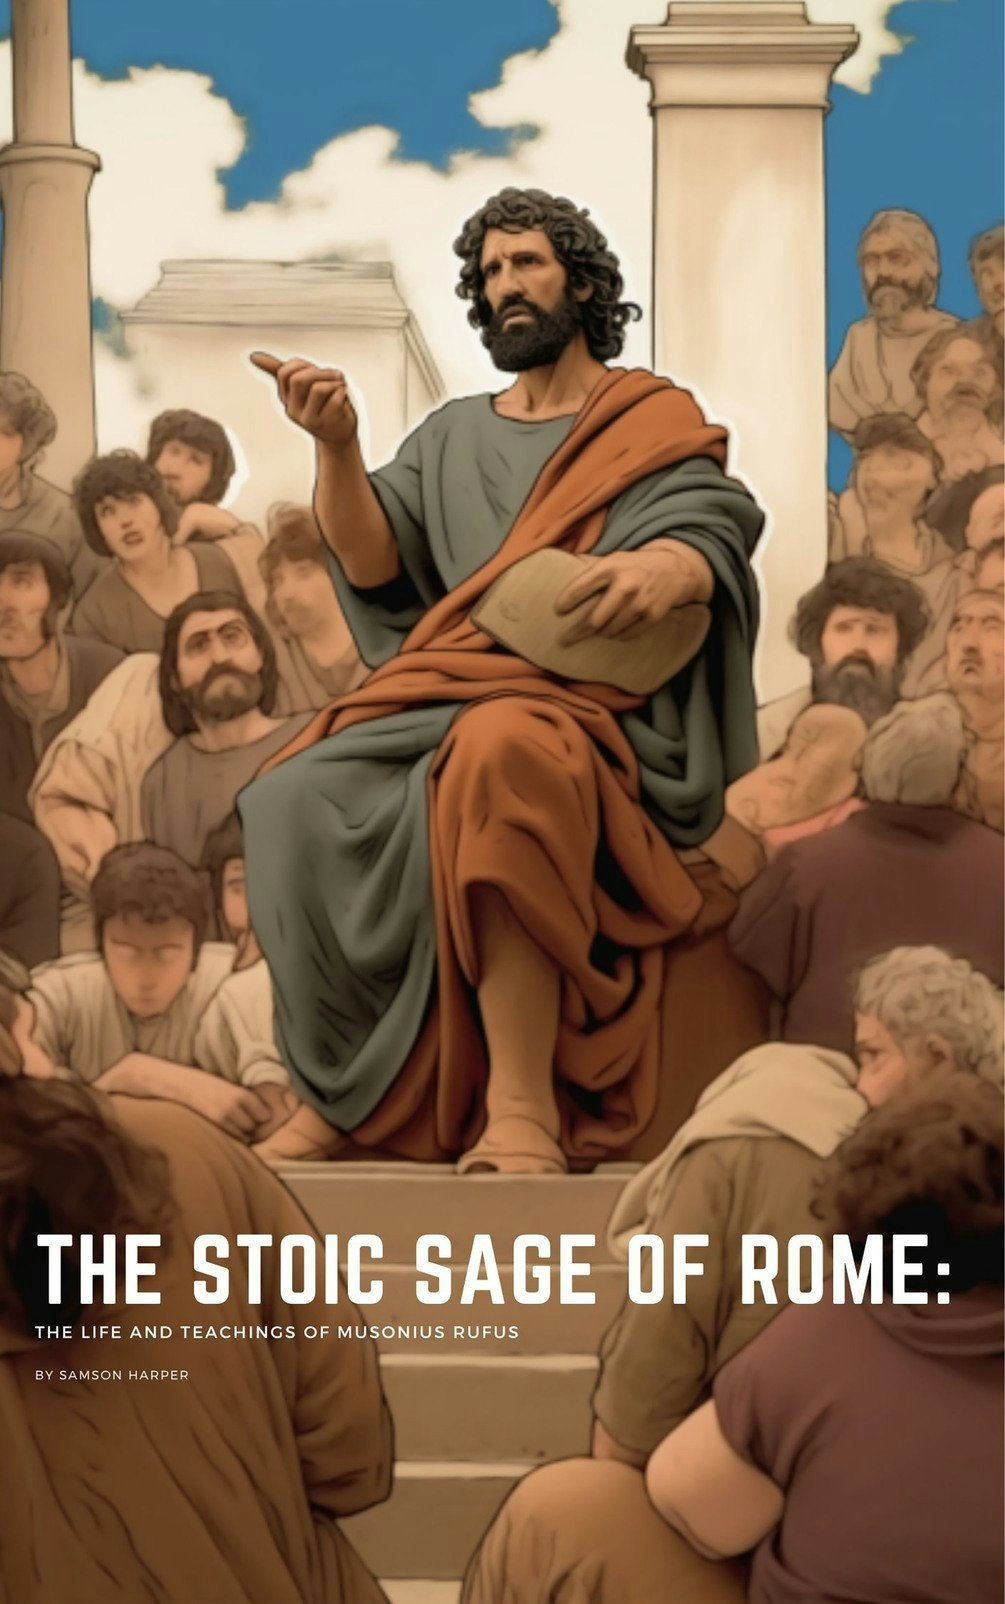 The Stoic Sage of Rome: The Life and Teachings of Musonius Rufus